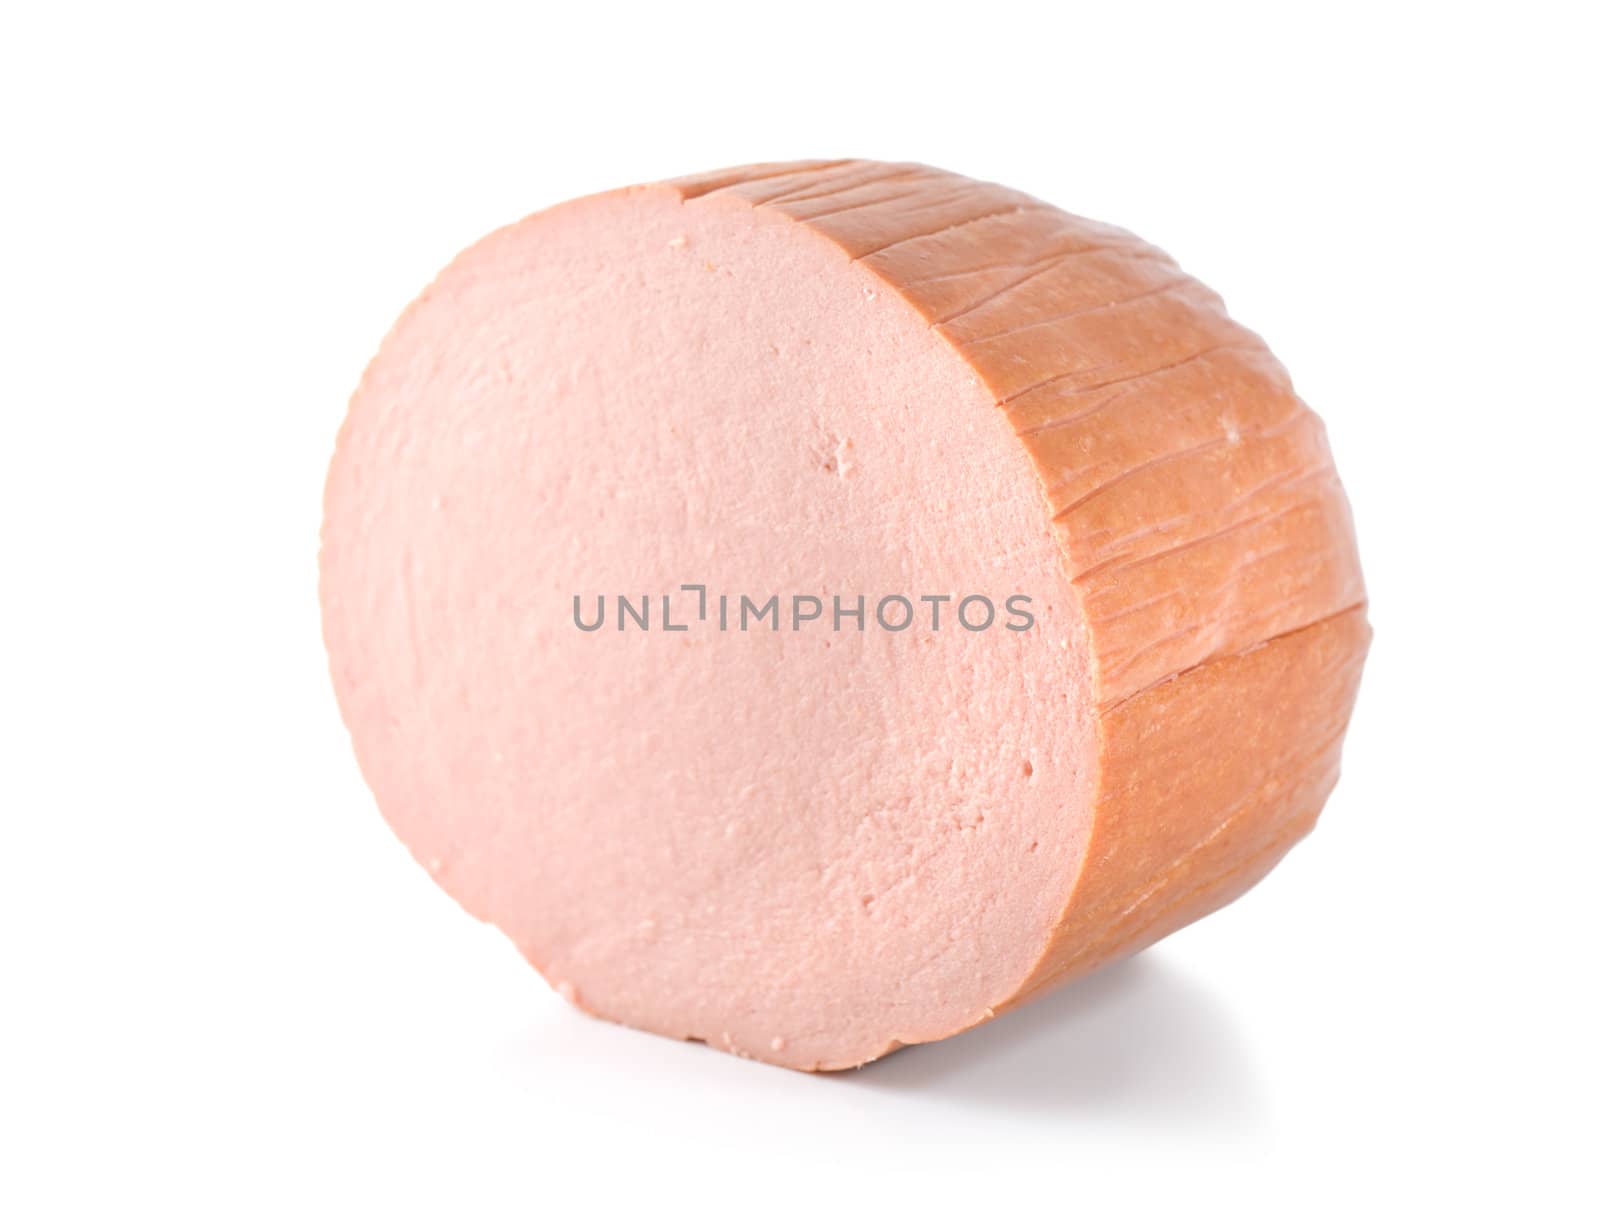 Pork sausage isolated on a white background